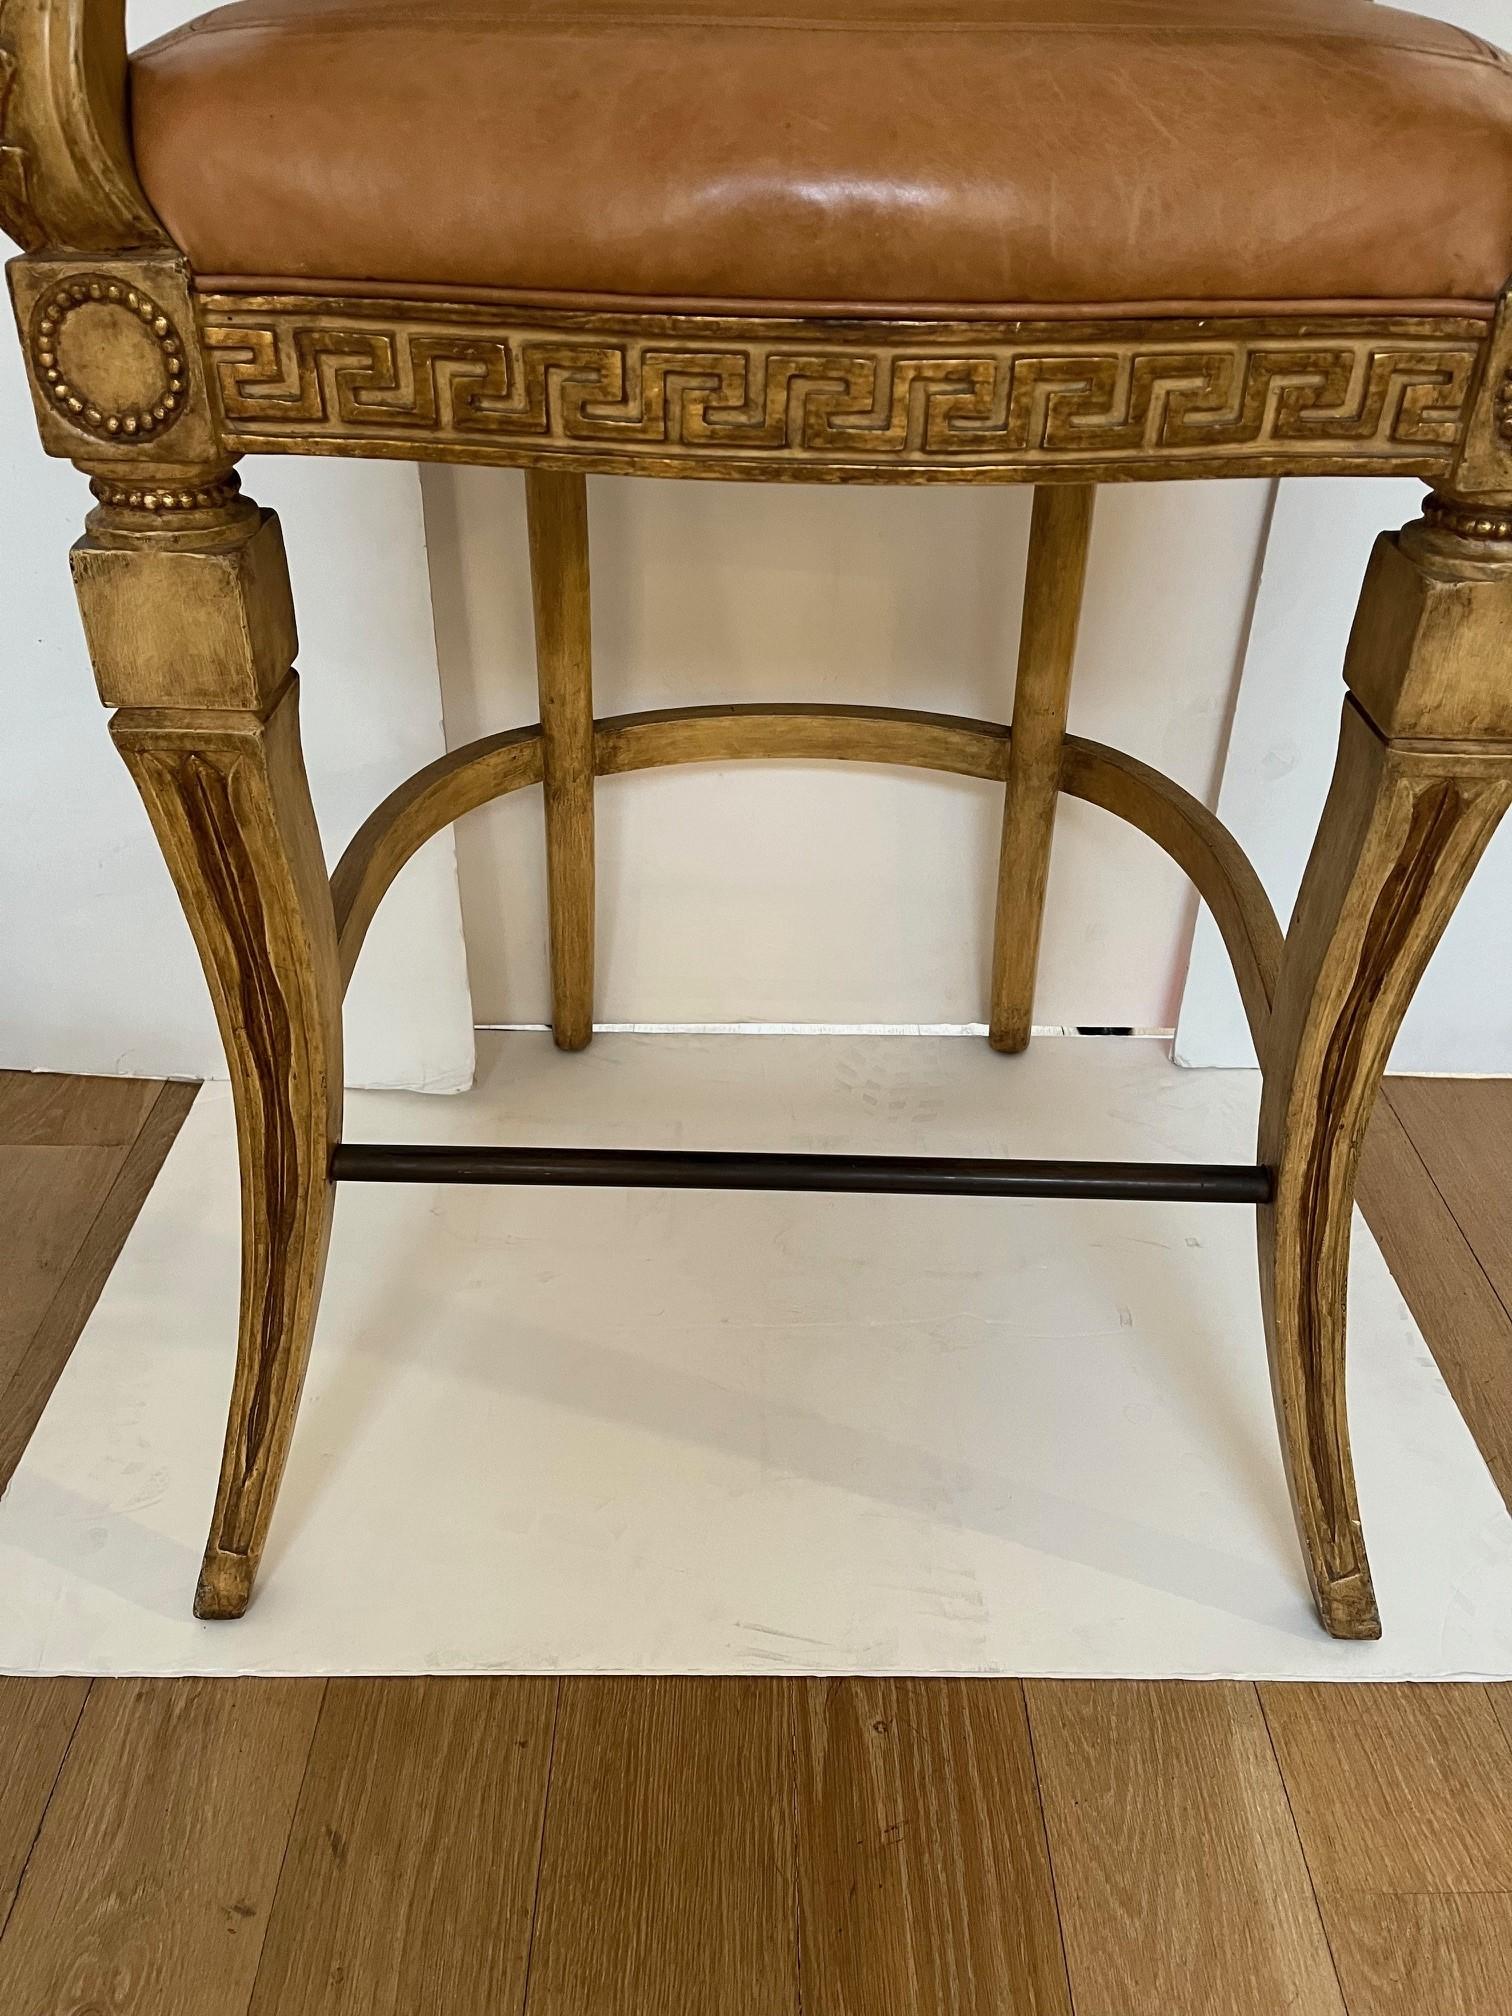 Made to Order Venetian Bar Stool in Antique Painted Finish with Gilded Detail For Sale 8